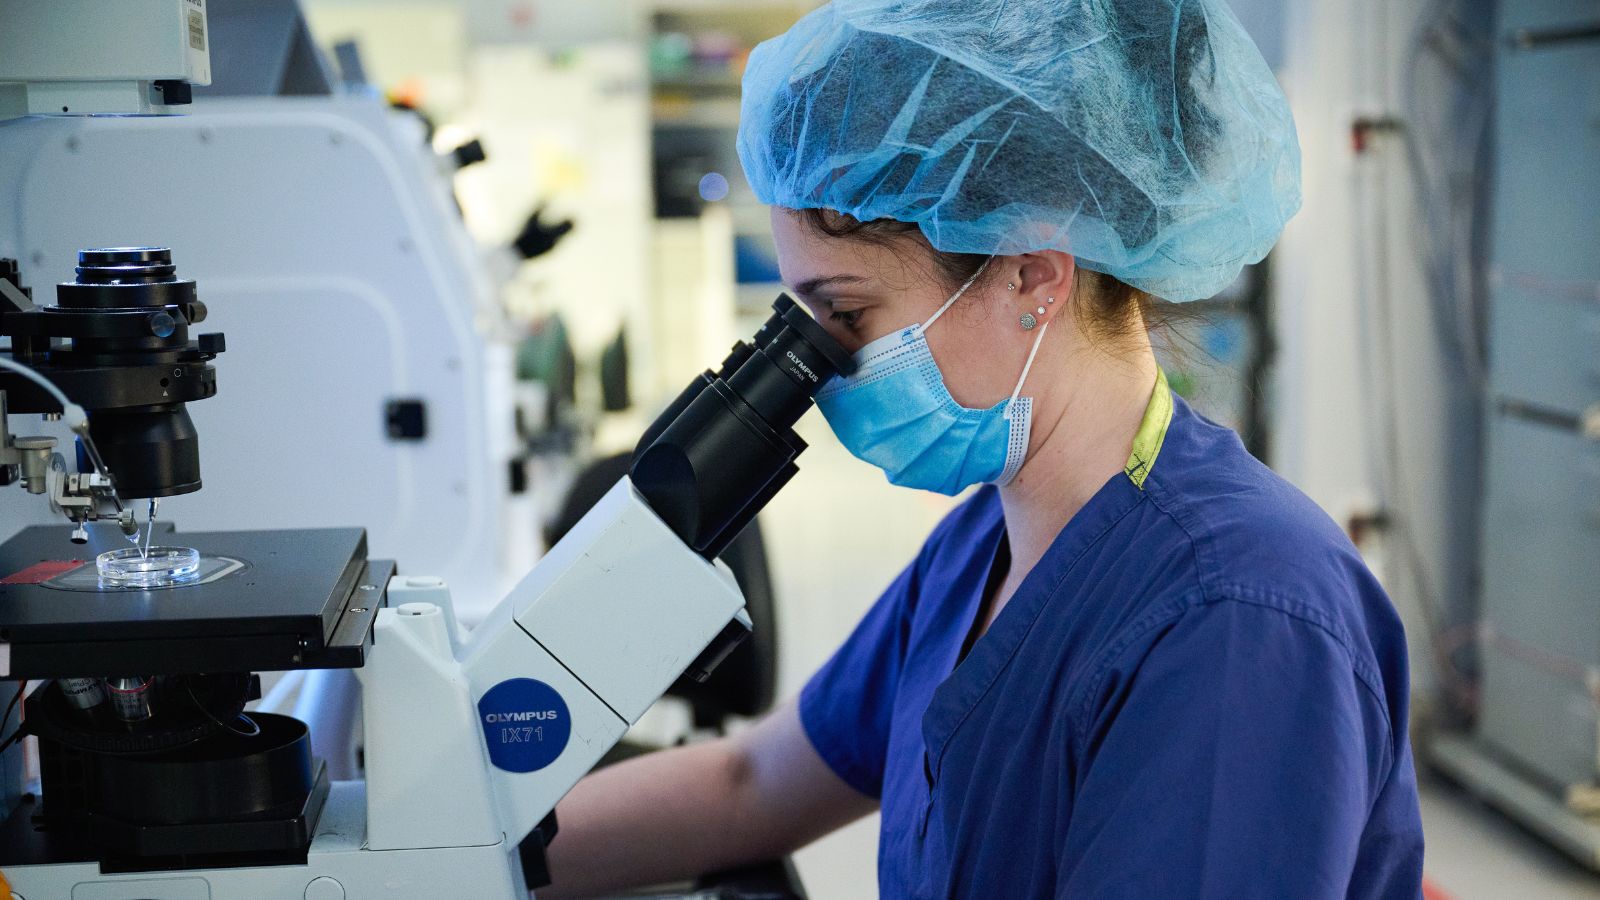 A Day in the Life of an Embryologist: Behind the Scenes of IVF